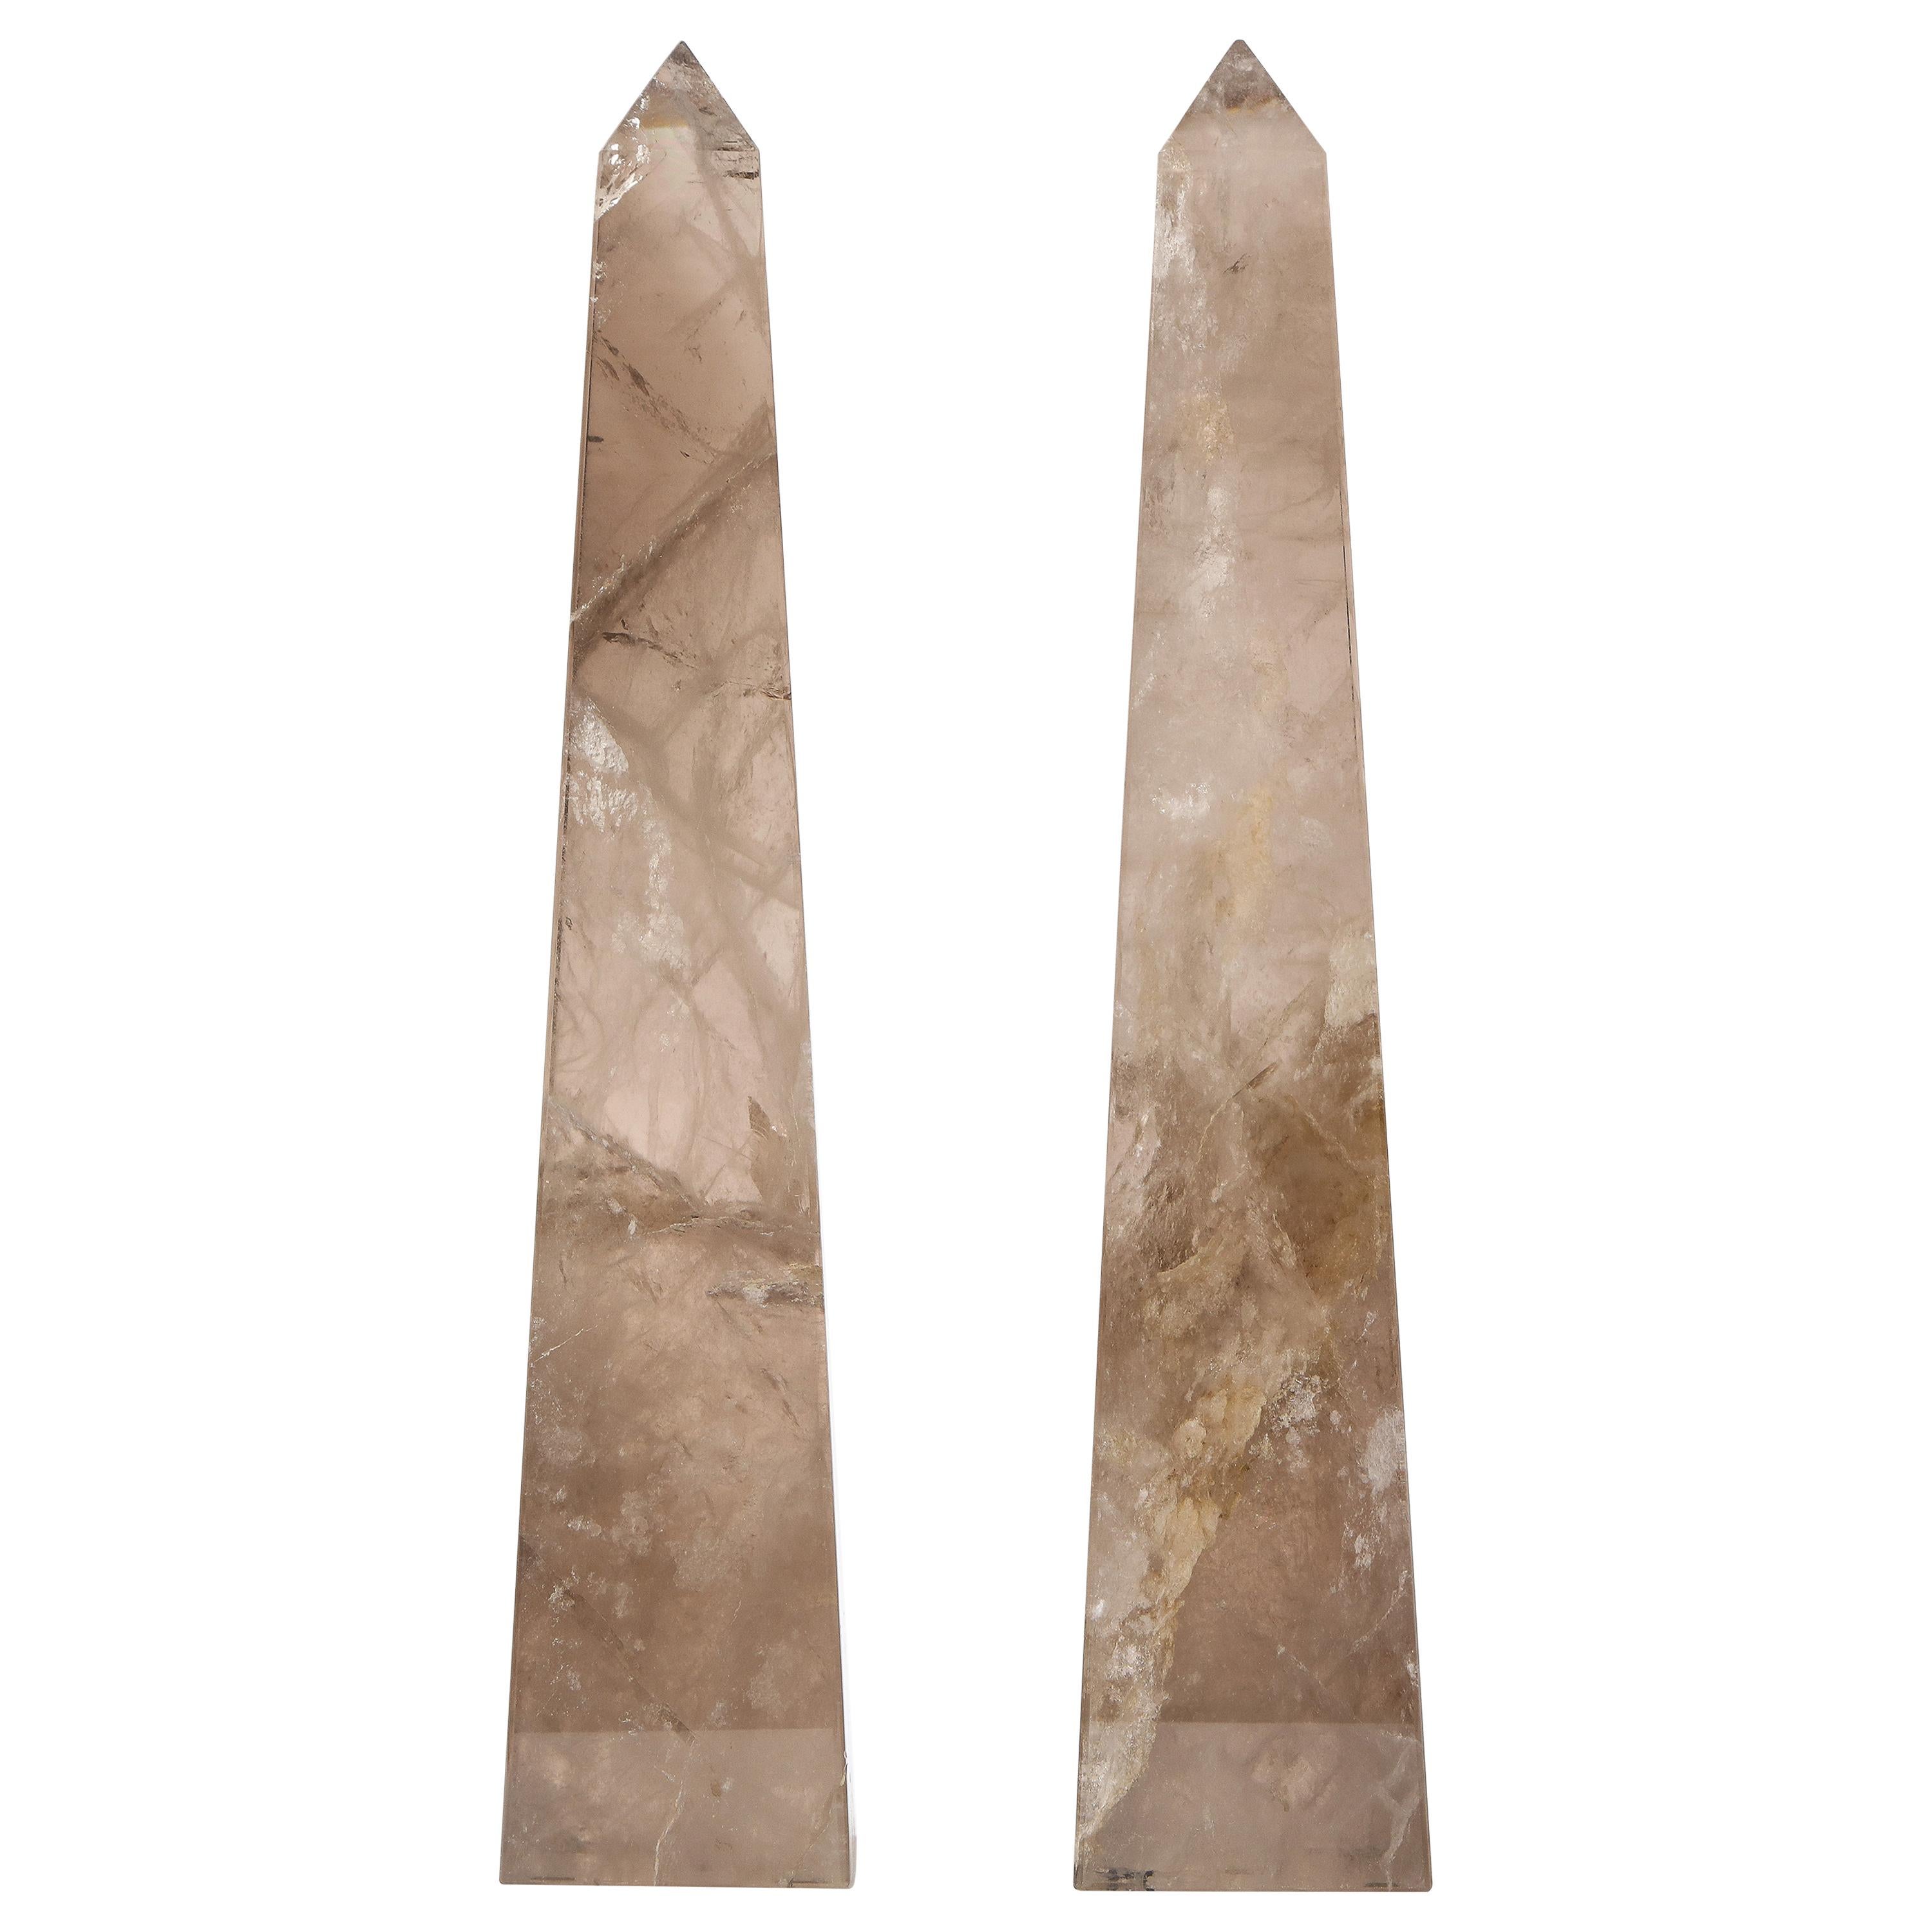 Pair of Smokey Rock Crystal Quartz Hand Carved and Hand-Polished Obelisks